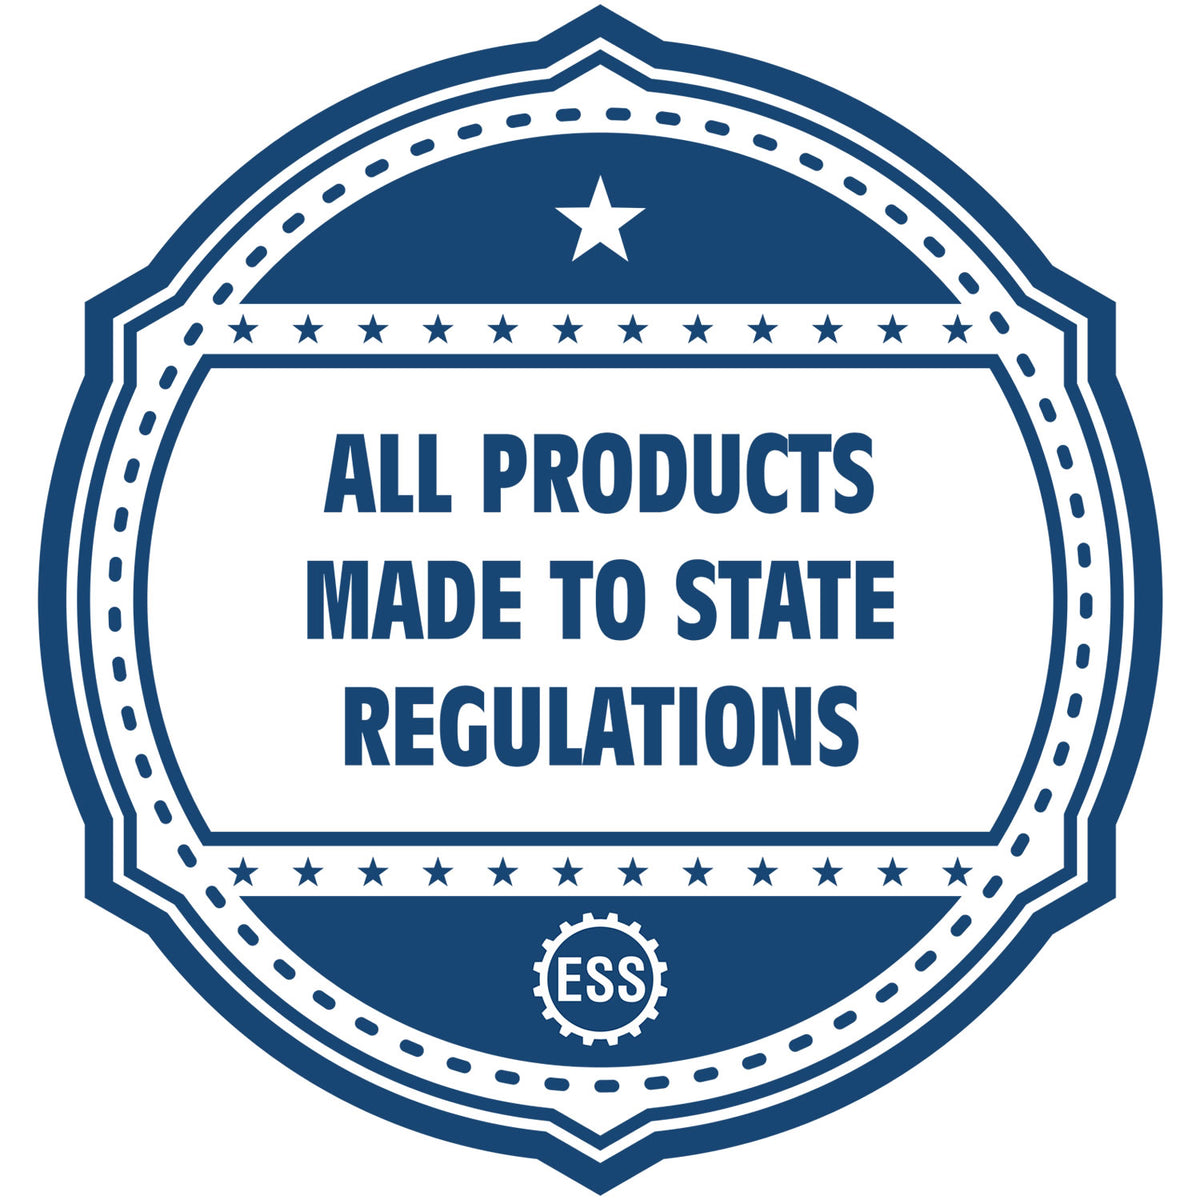 An icon or badge element for the Premium MaxLight Pre-Inked Nebraska Landscape Architectural Stamp showing that this product is made in compliance with state regulations.